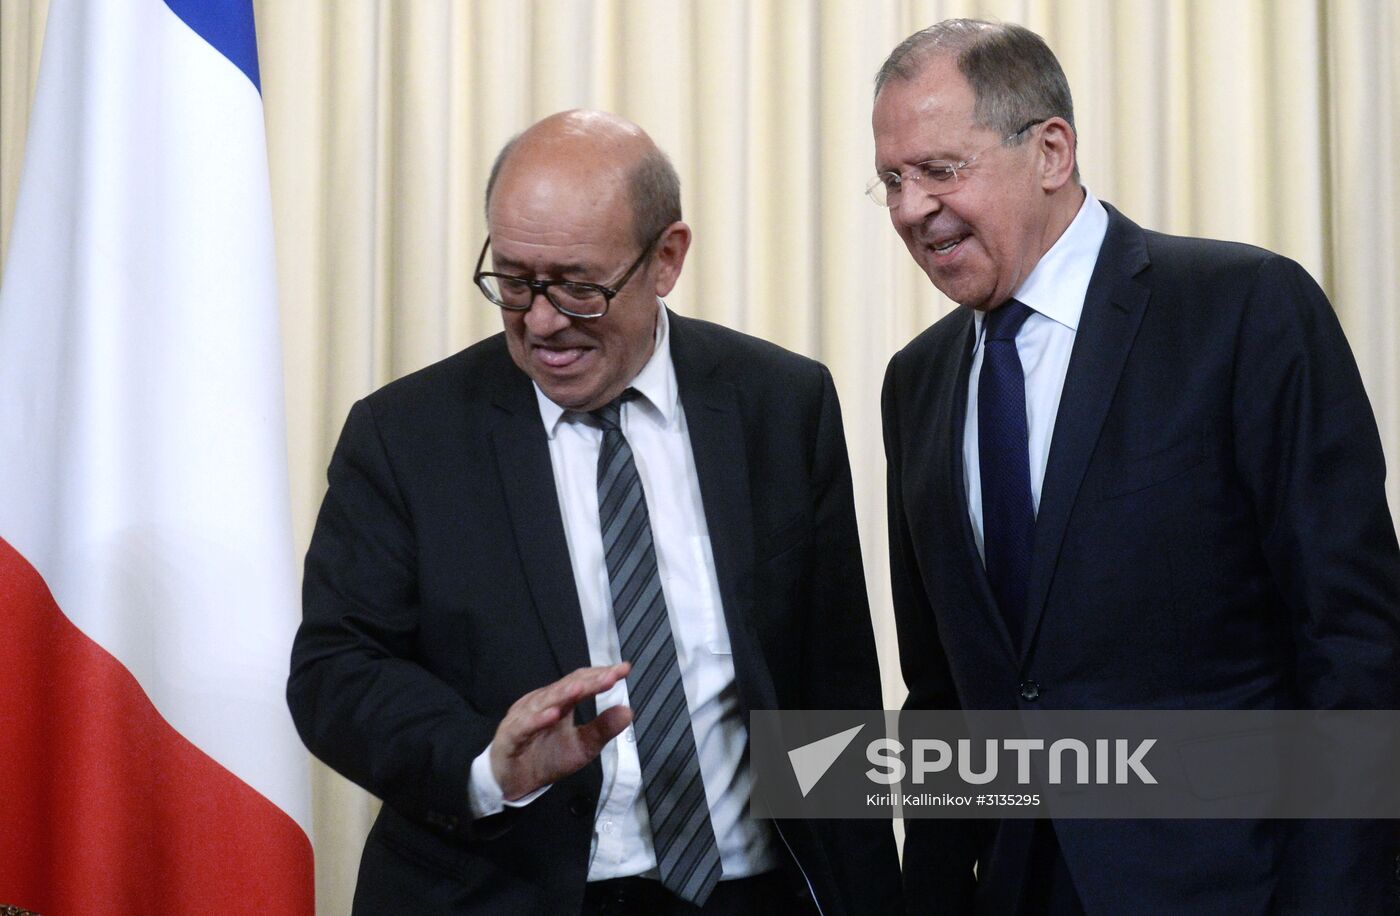 Foreign Ministers of Russia, France meet in Moscow